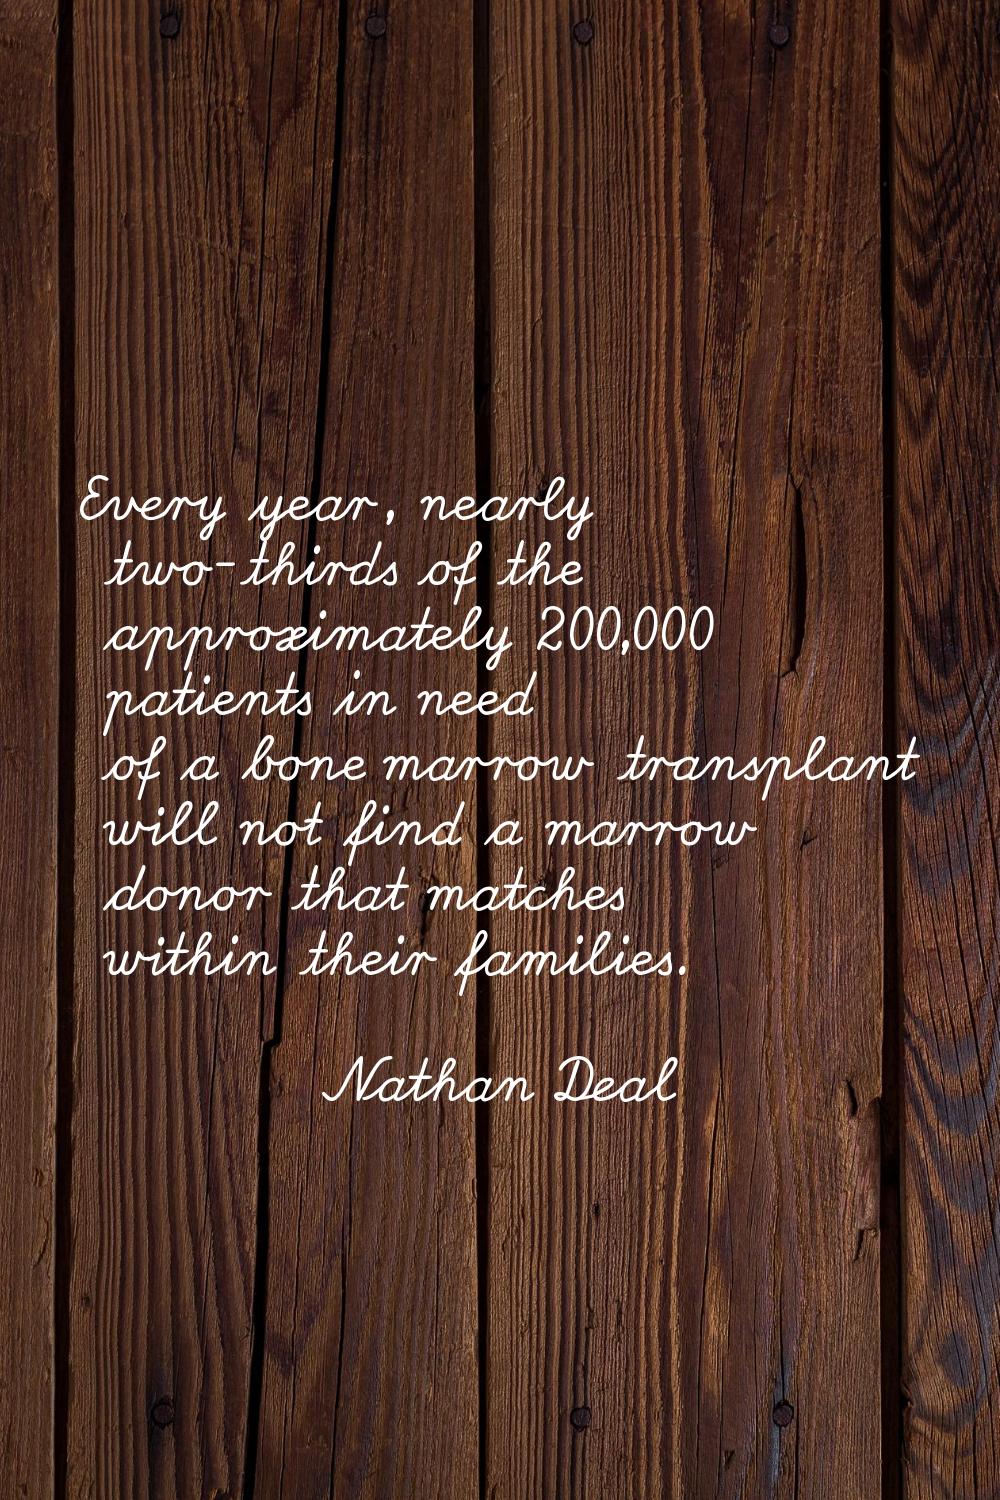 Every year, nearly two-thirds of the approximately 200,000 patients in need of a bone marrow transp